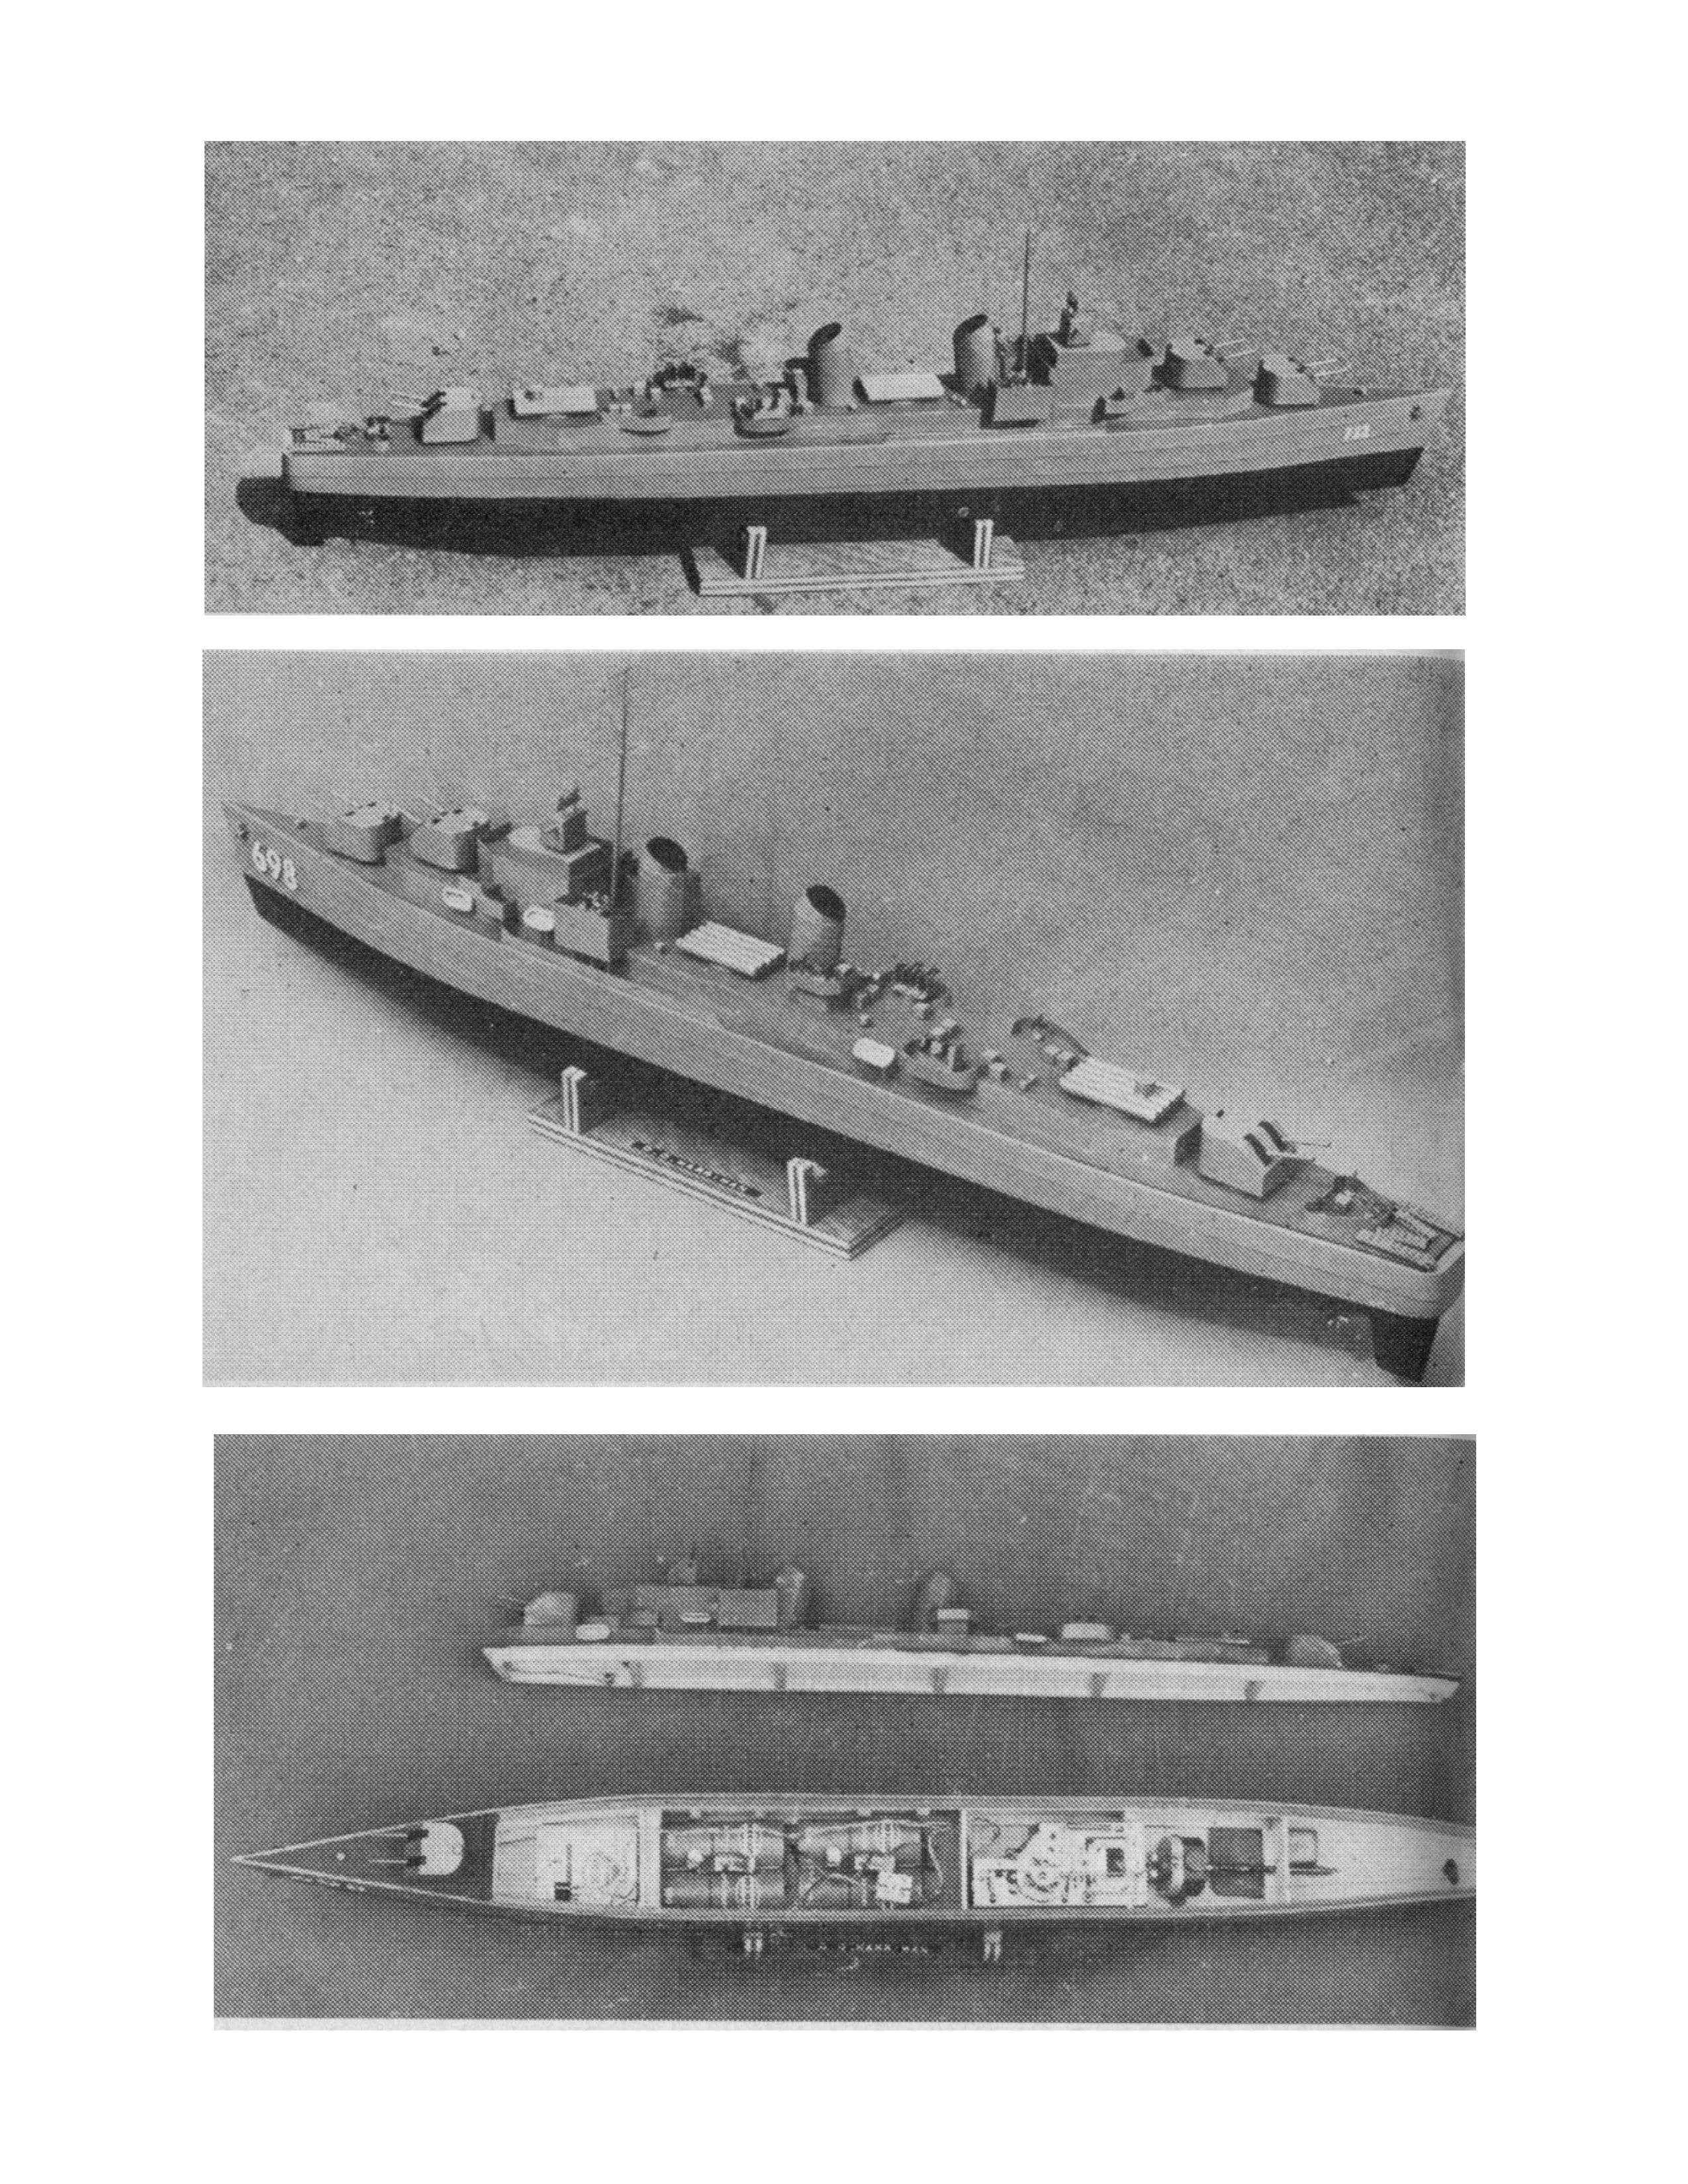 full size printed plan and article semi-scale 1/144, l 31 3/4" allen m. sumner class of destroyer